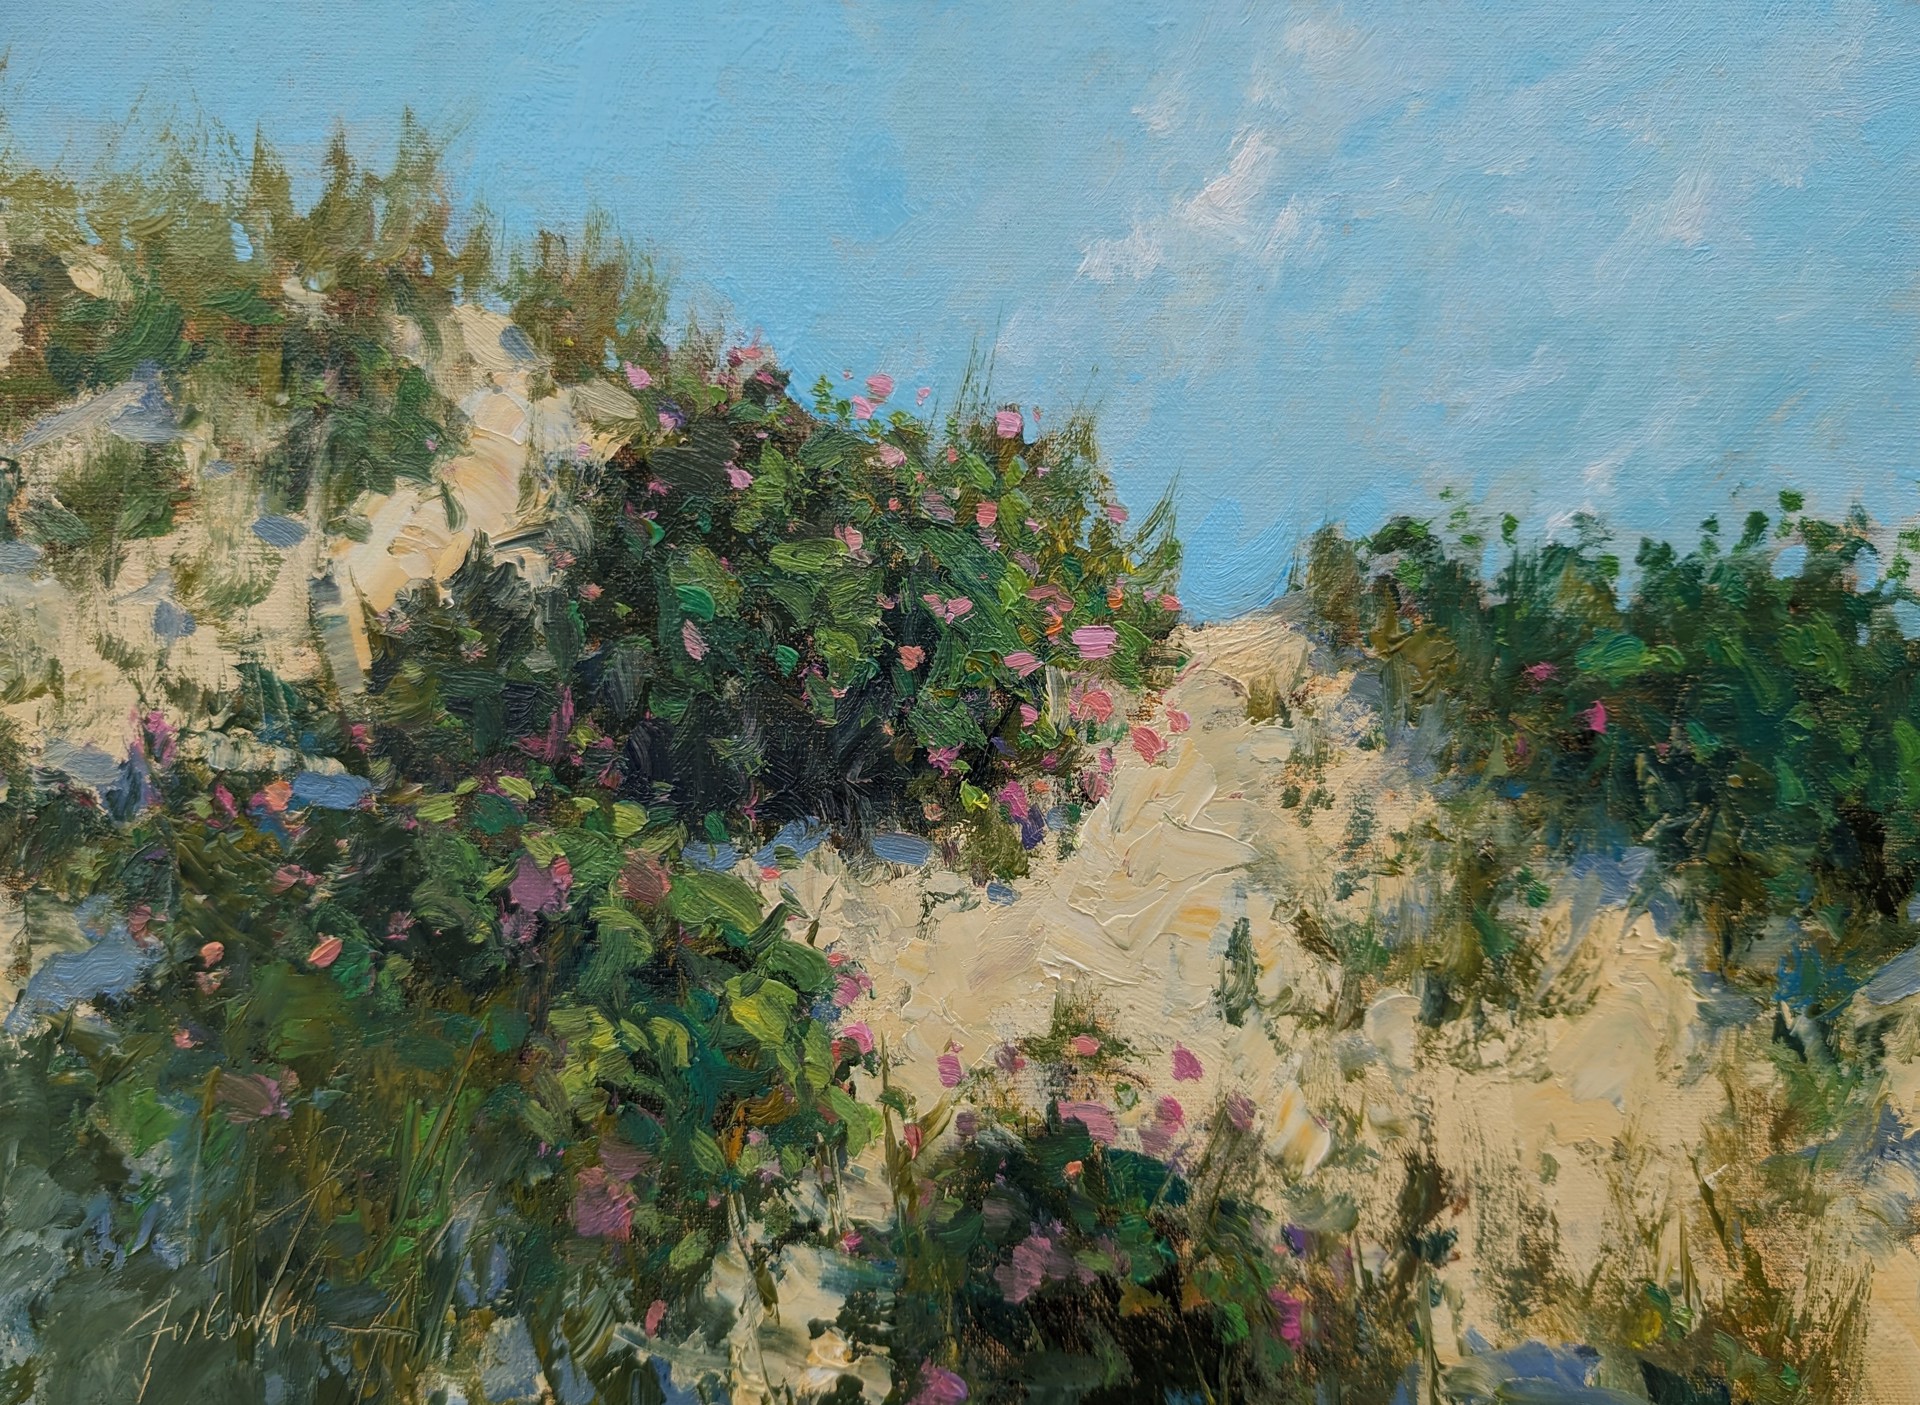 Dunes in June by Jonathan McPhillips